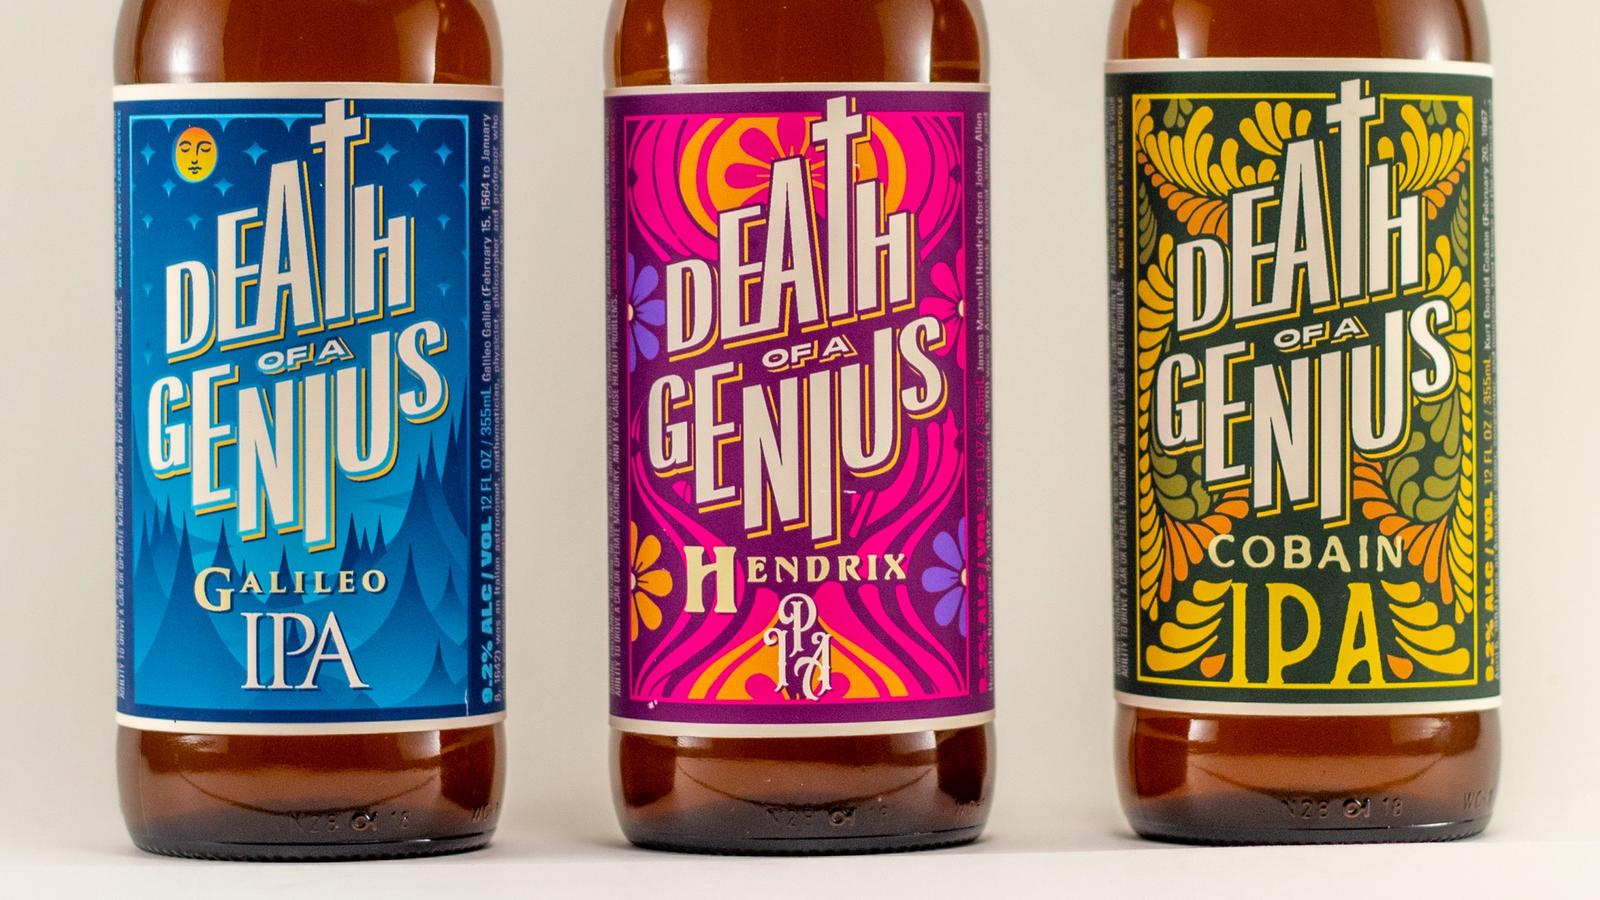 Death of a Genius IPA // Galileo, Hendrix, and Cobain packaging